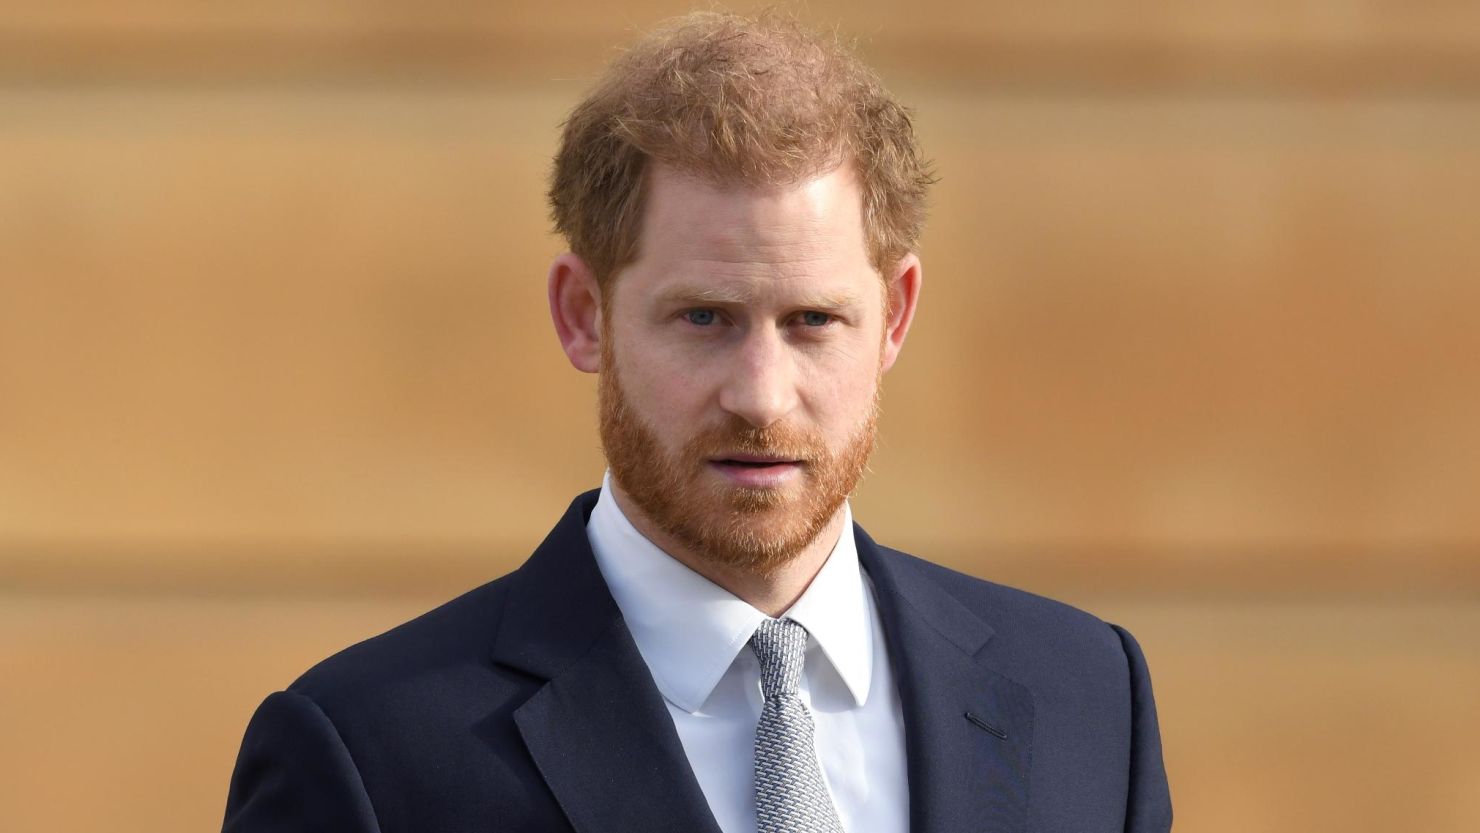 Prince Harry apologized as "not enough has been done to right the wrongs of the past." 